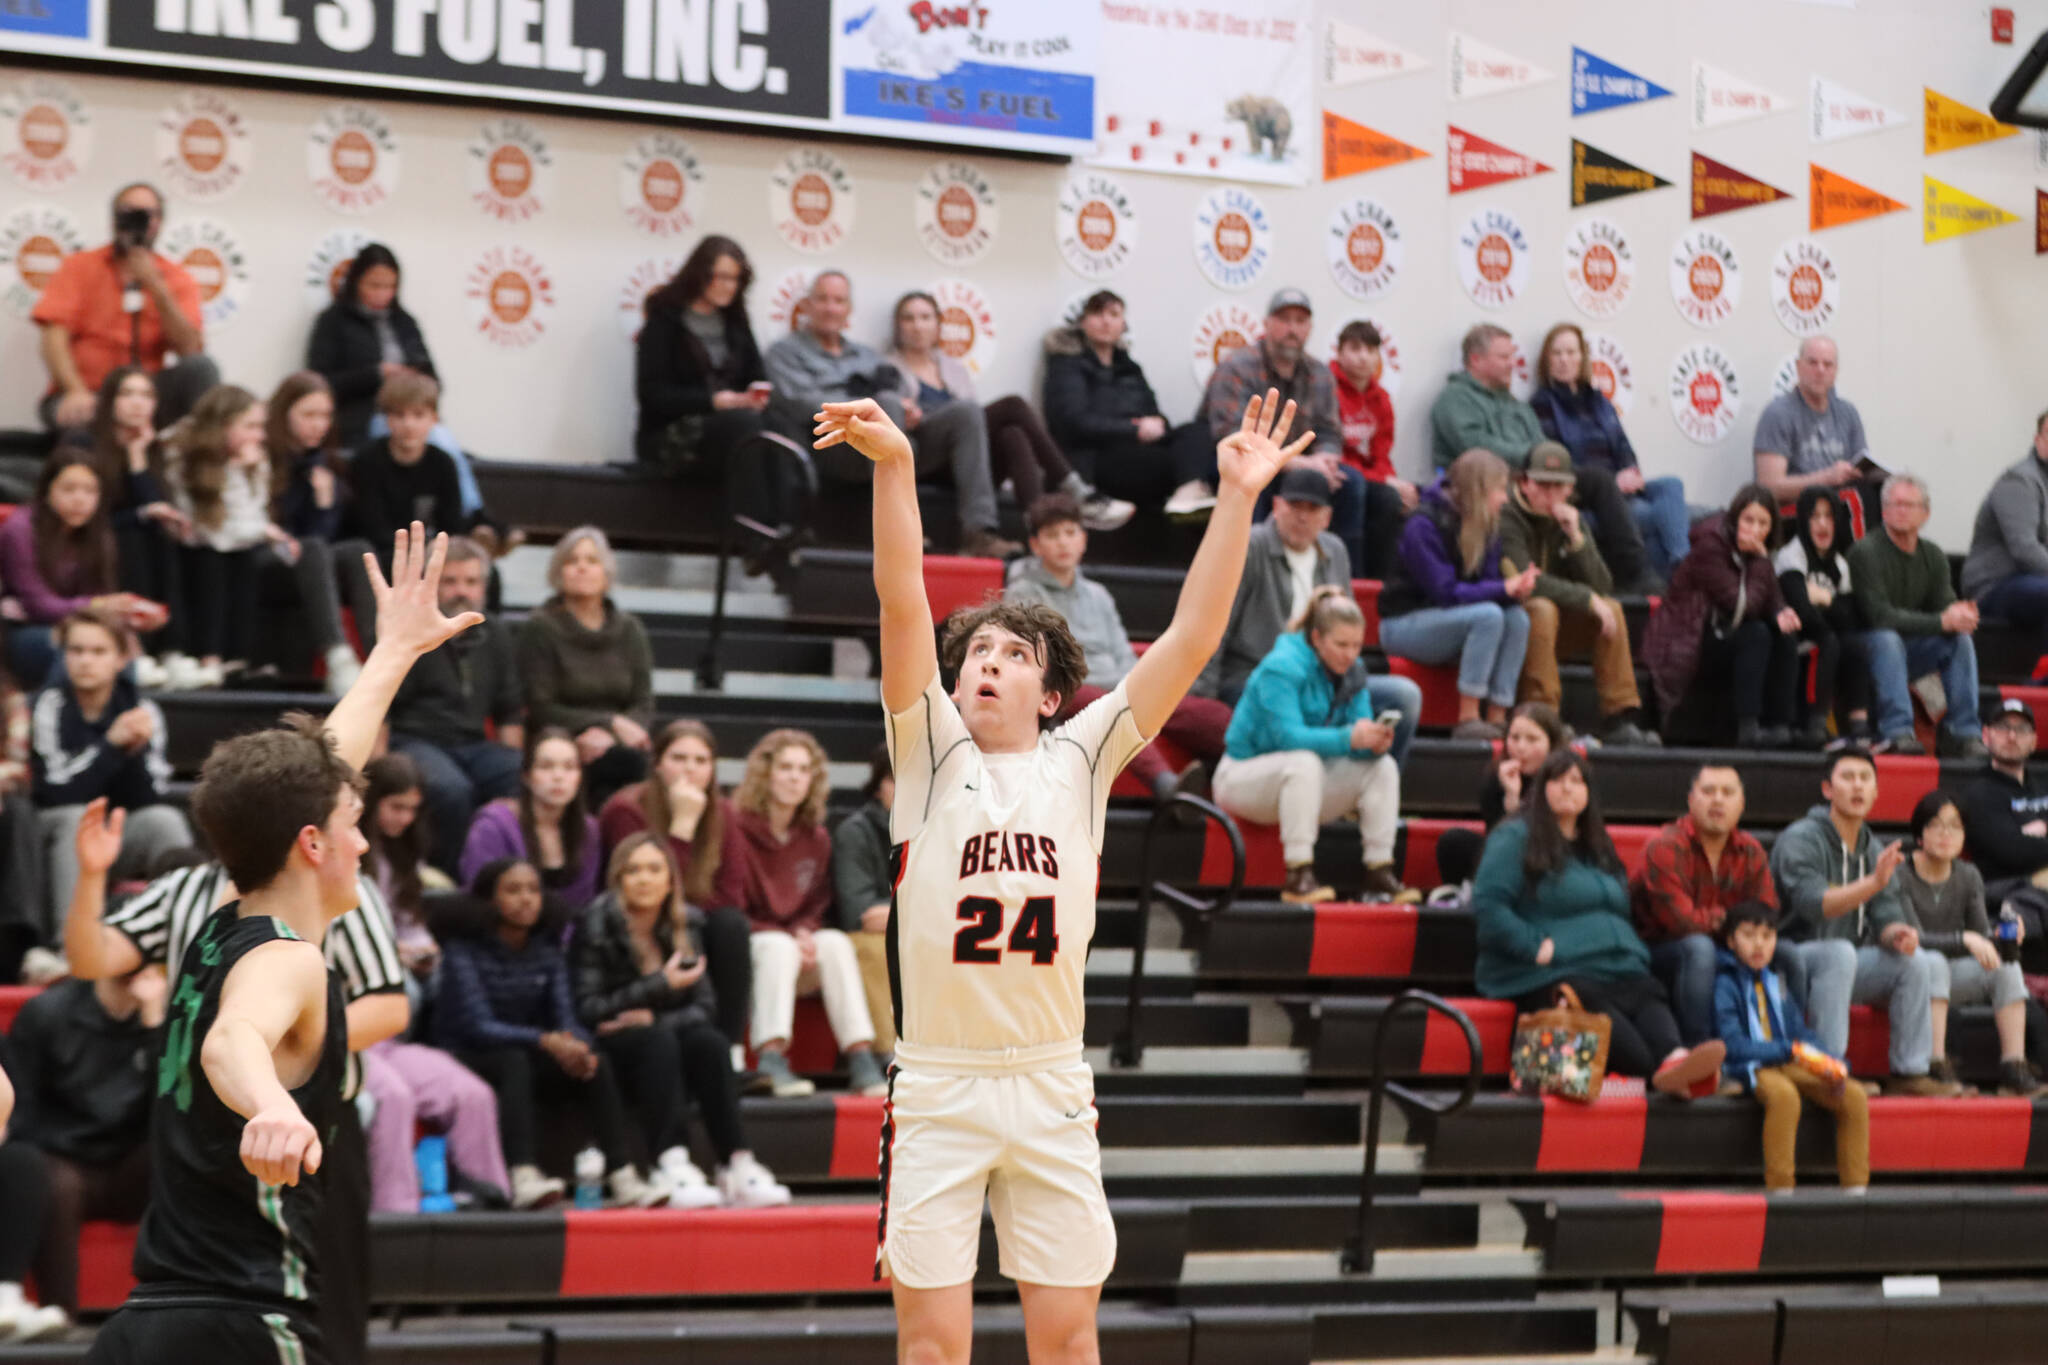 JDHS senior Kai Hargrave sinks a 3-point shot in the third quarter during Wednesday night’s home game against Colony High School. (Jonson Kuhn / Juneau Empire)